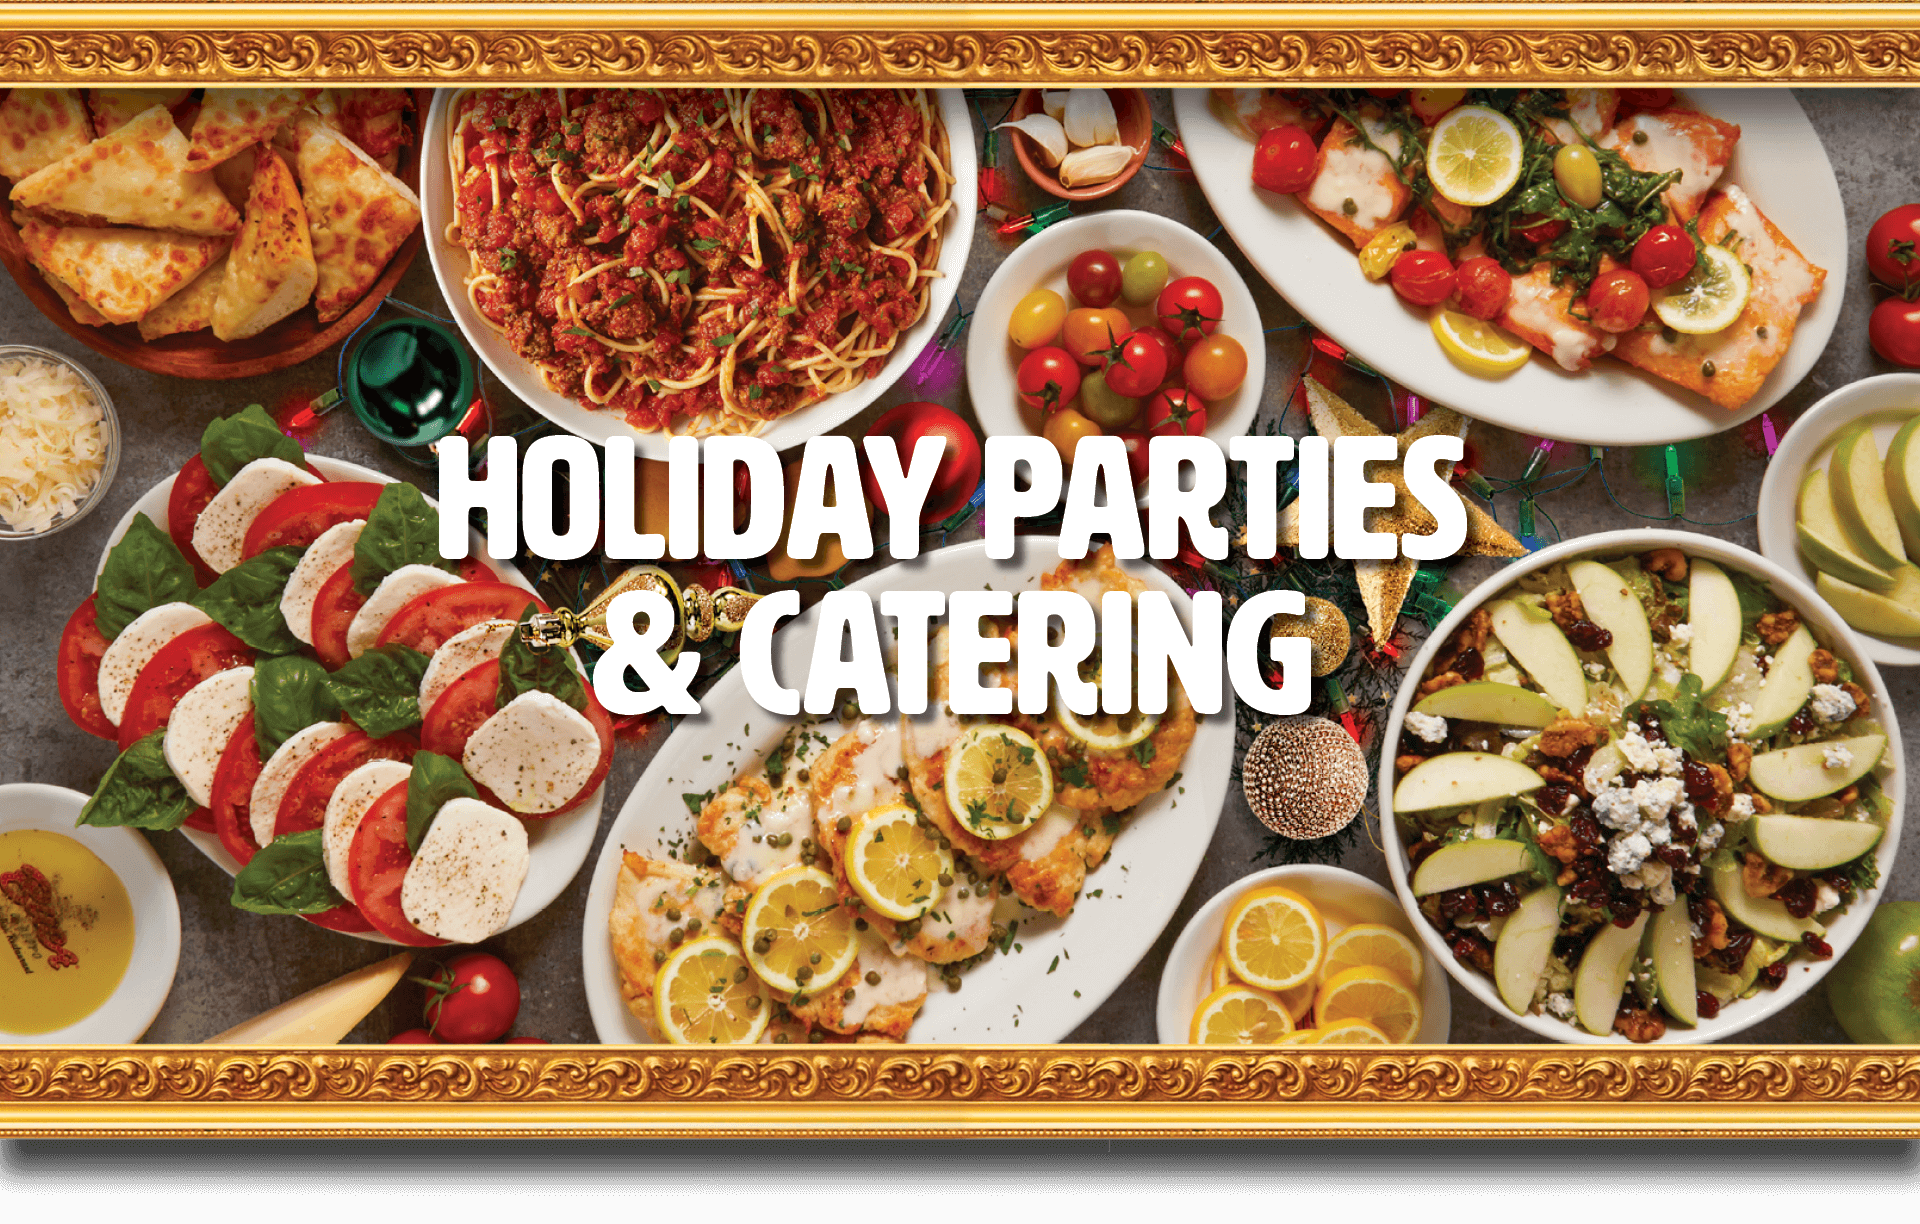 Holidays and catering at Buca di Beppo.